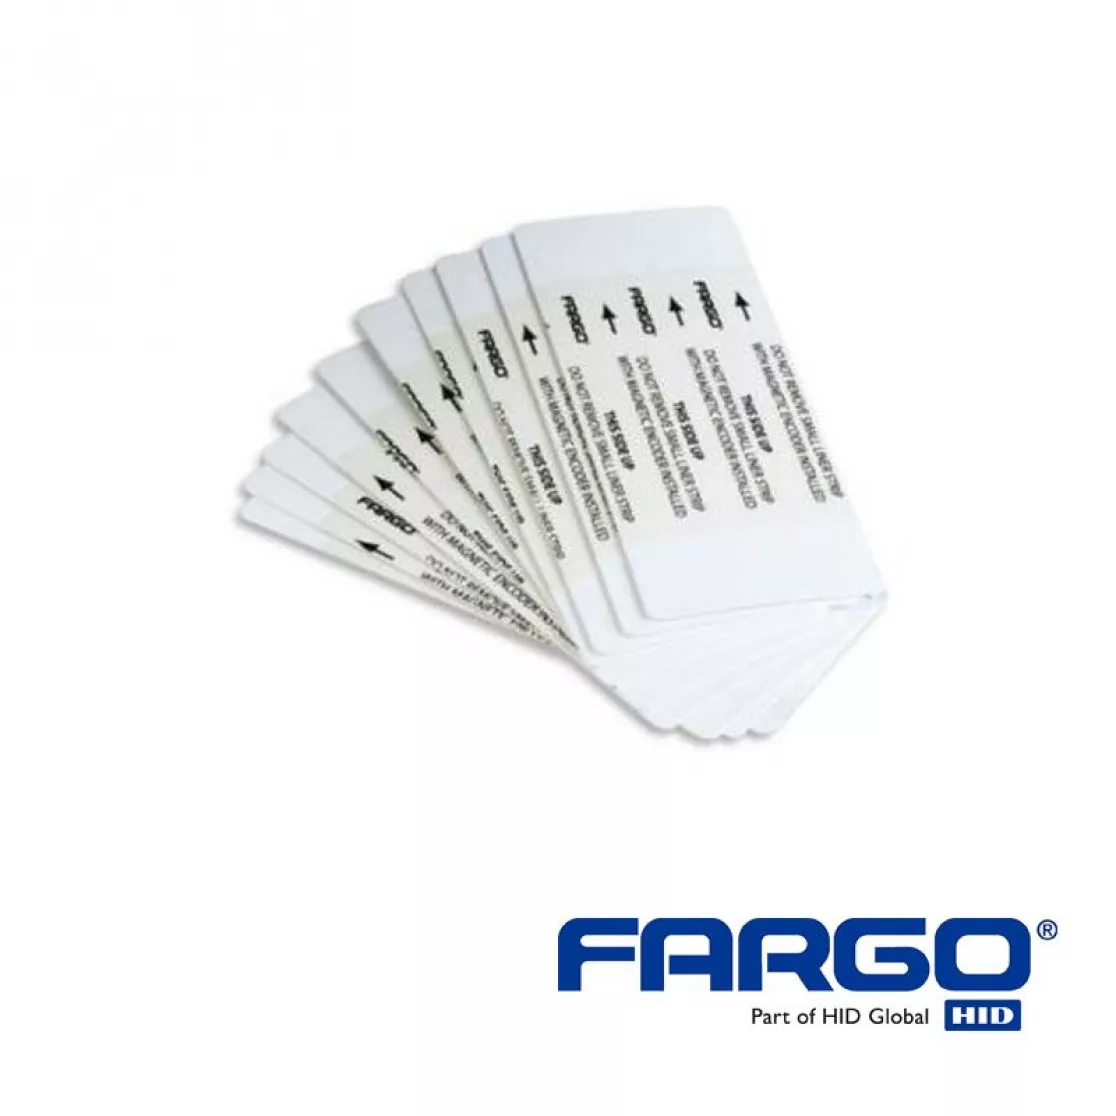 Cleaning cards double-sided for hid fargo DTC1500e card printer